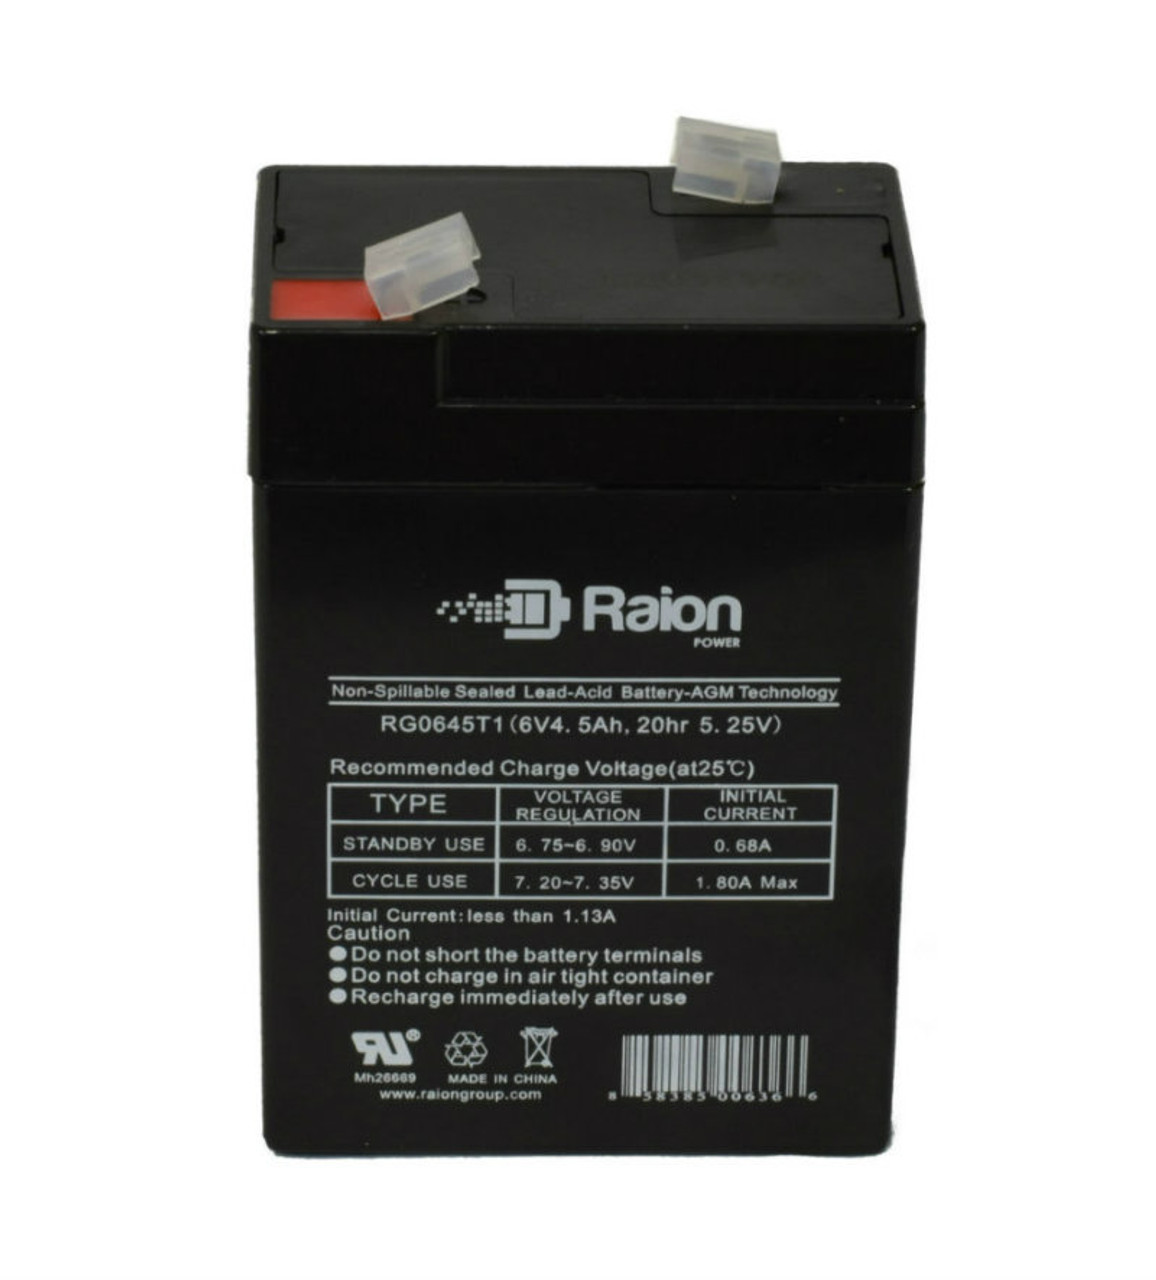 Raion Power RG0645T1 Replacement Battery Cartridge for Baxter Healthcare Cardiac Output Computer 522